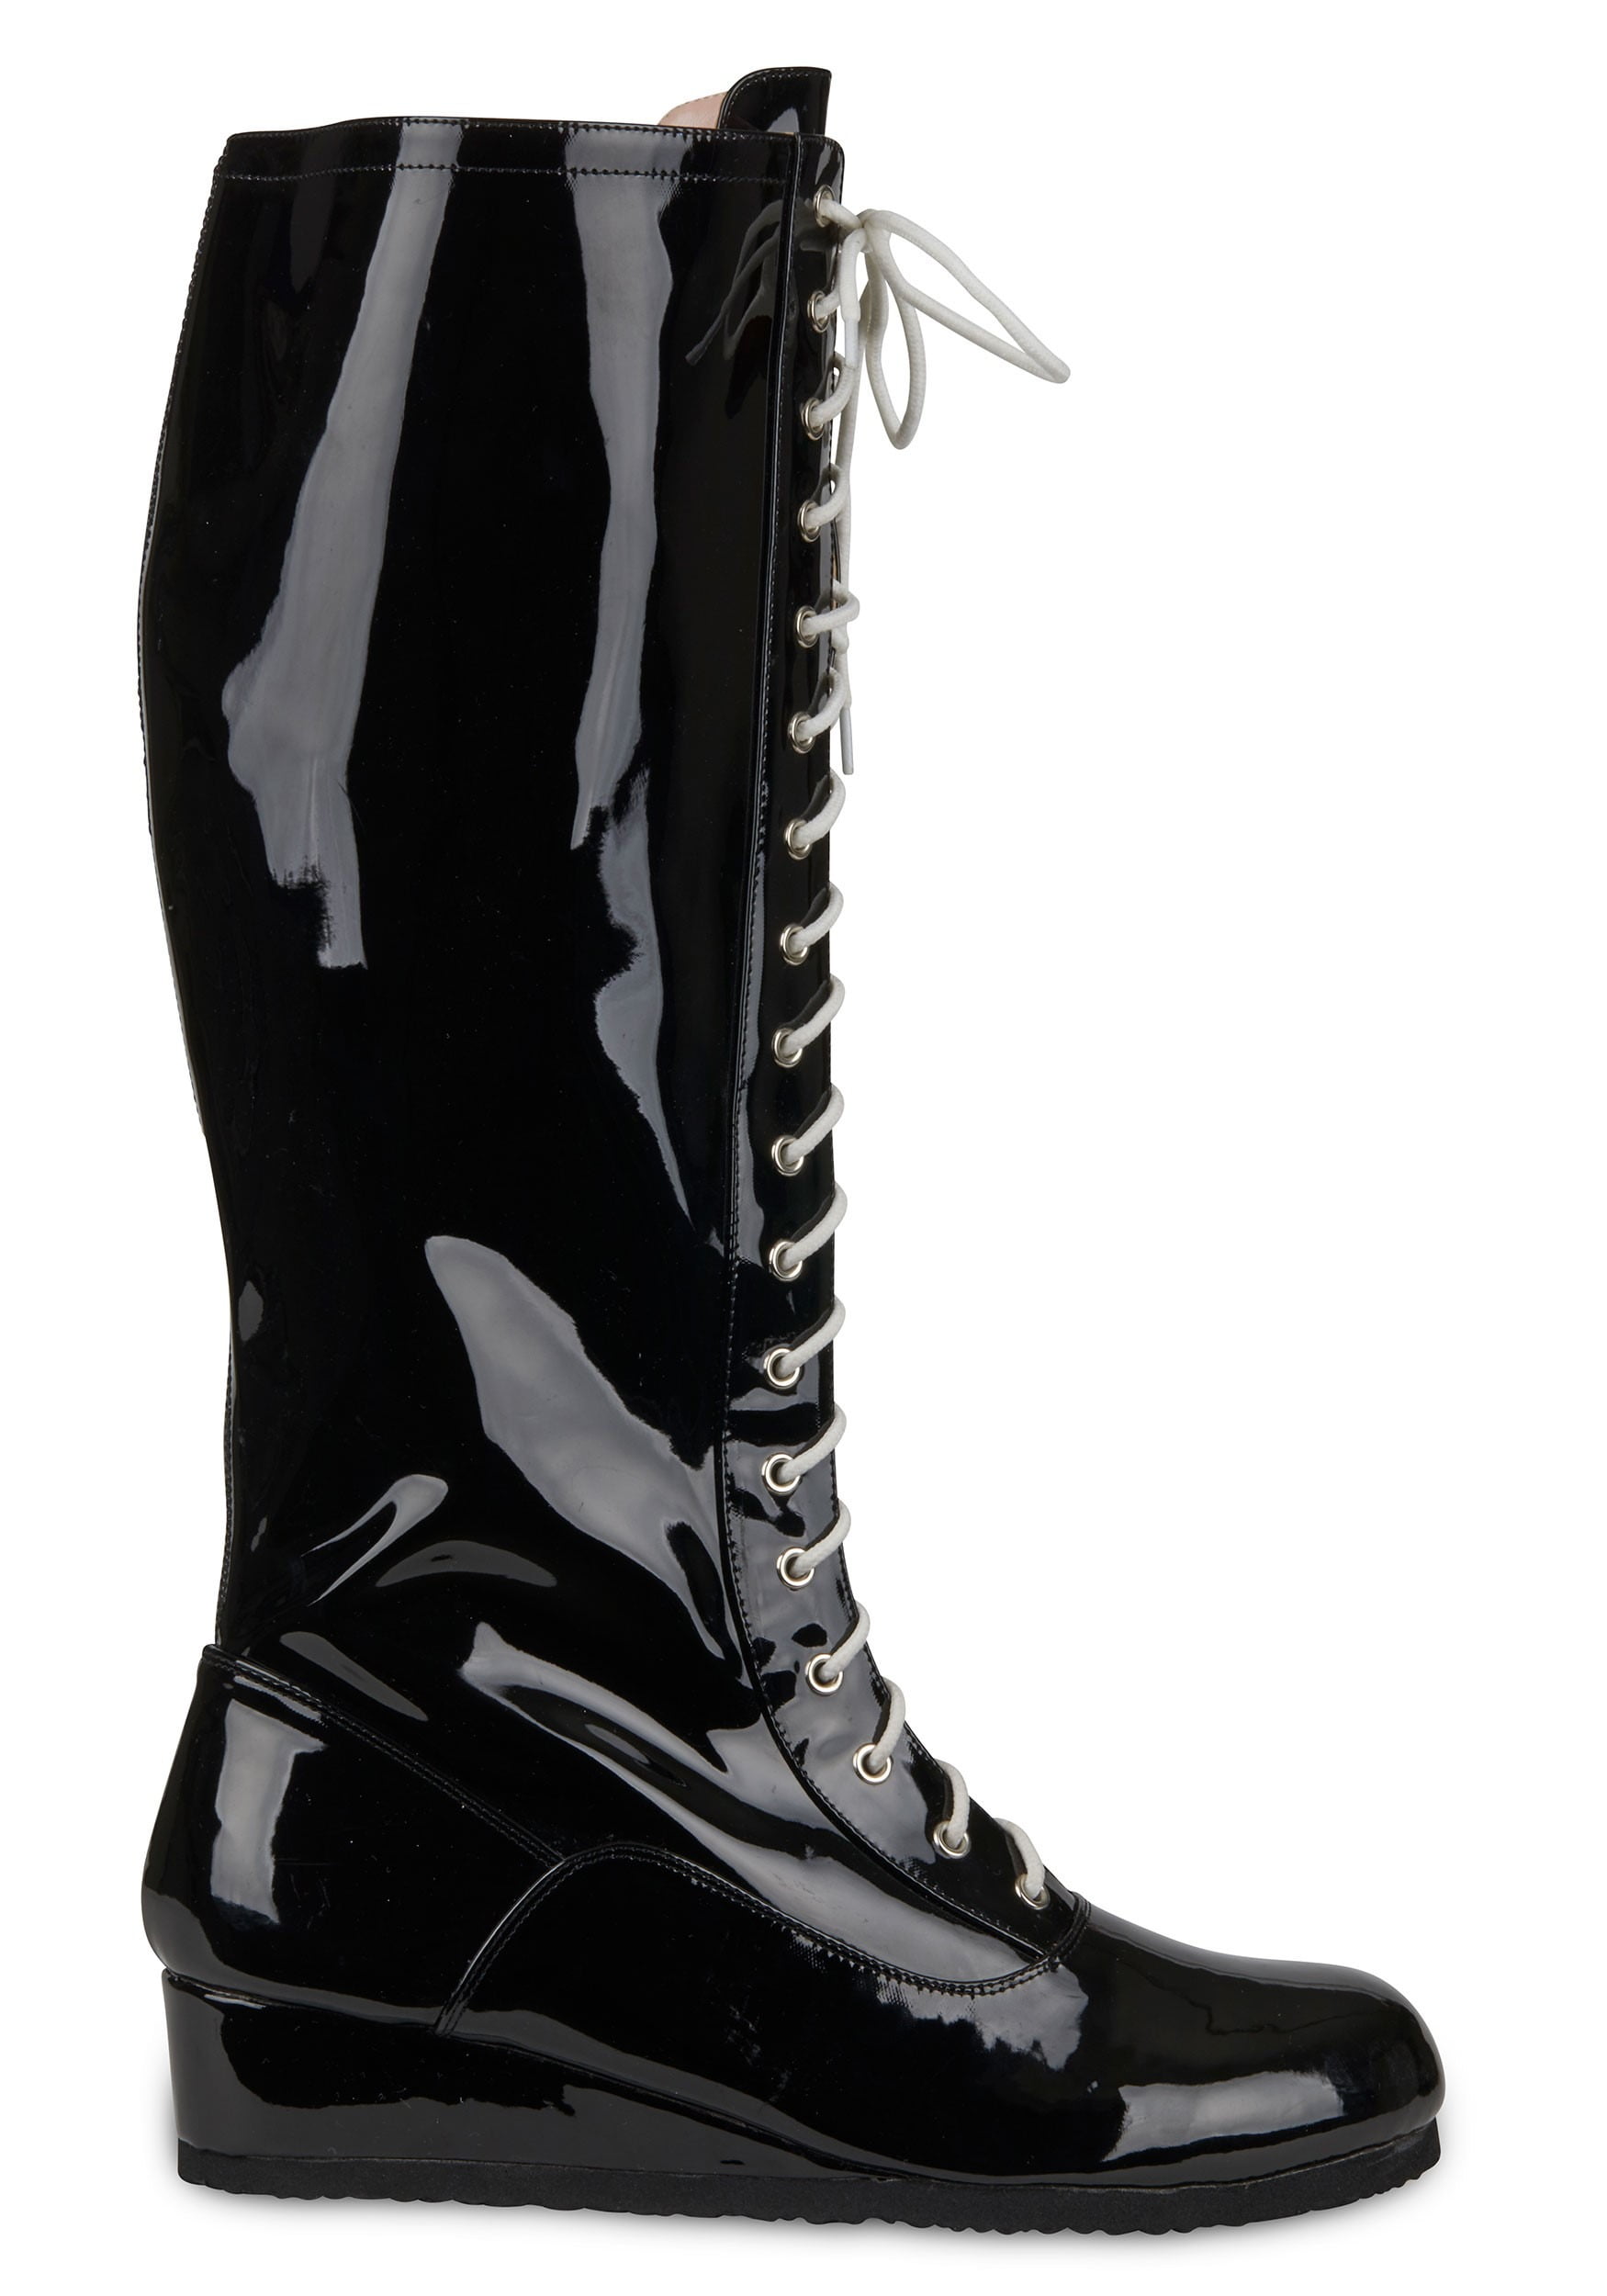 wrestling boot covers